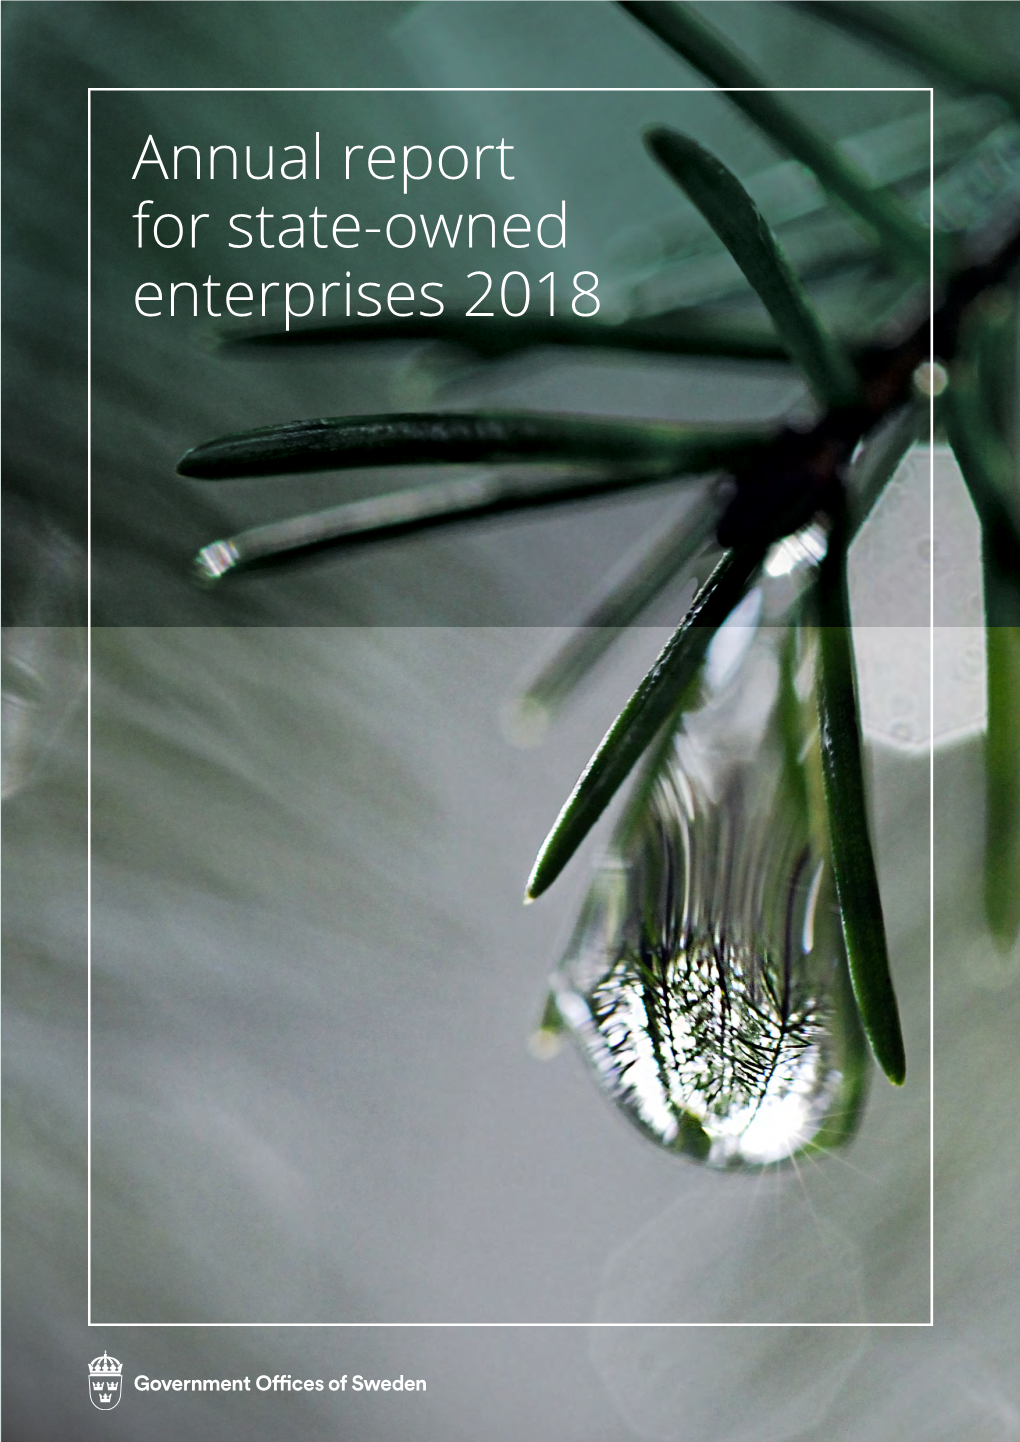 Annual Report for State-Owned Enterprises 2018 for State-Owned Enterprises 2018